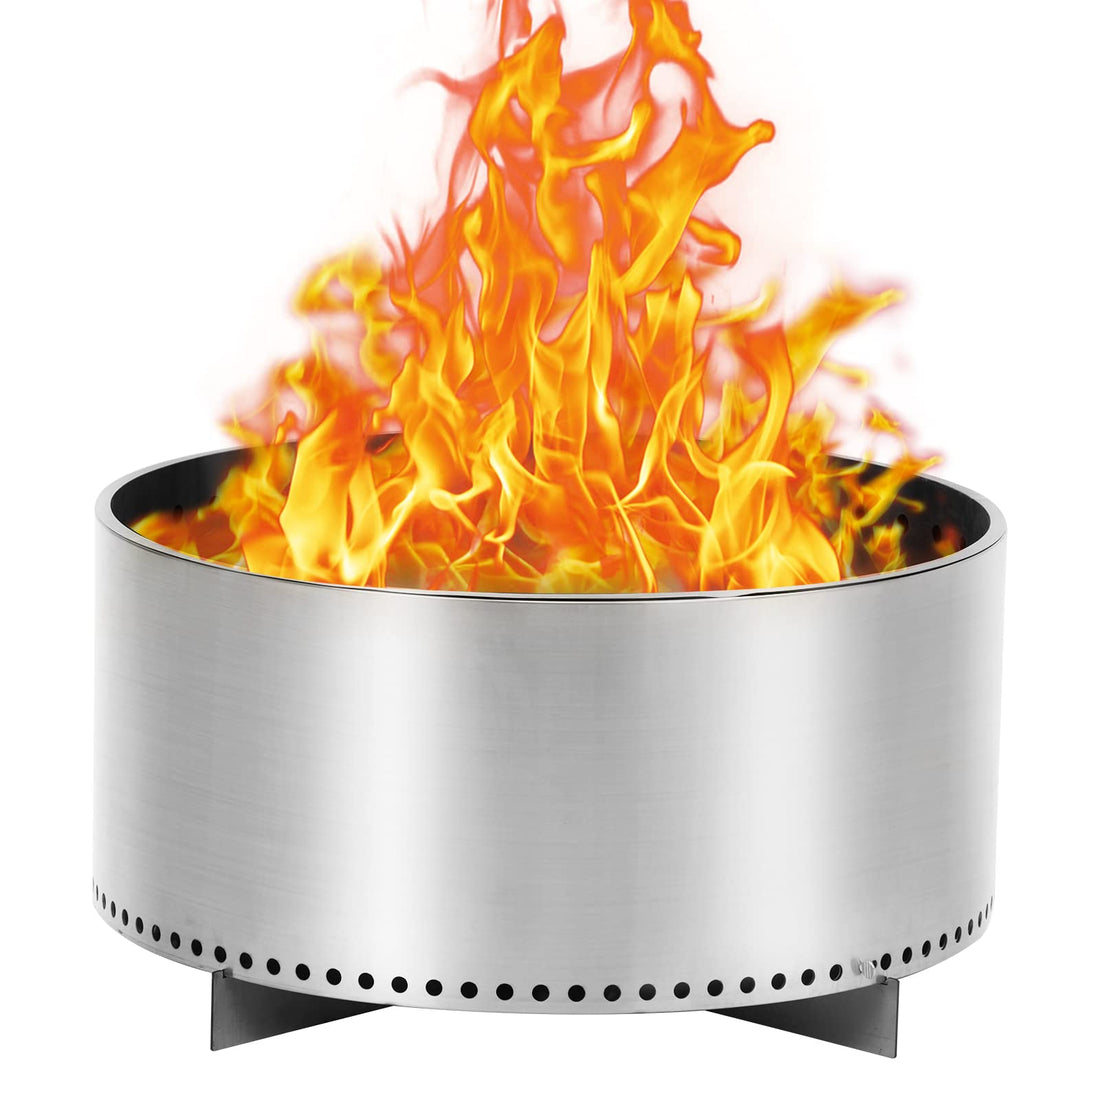 27 Inch Stainless Steel Smokeless Fire Pit for Camping